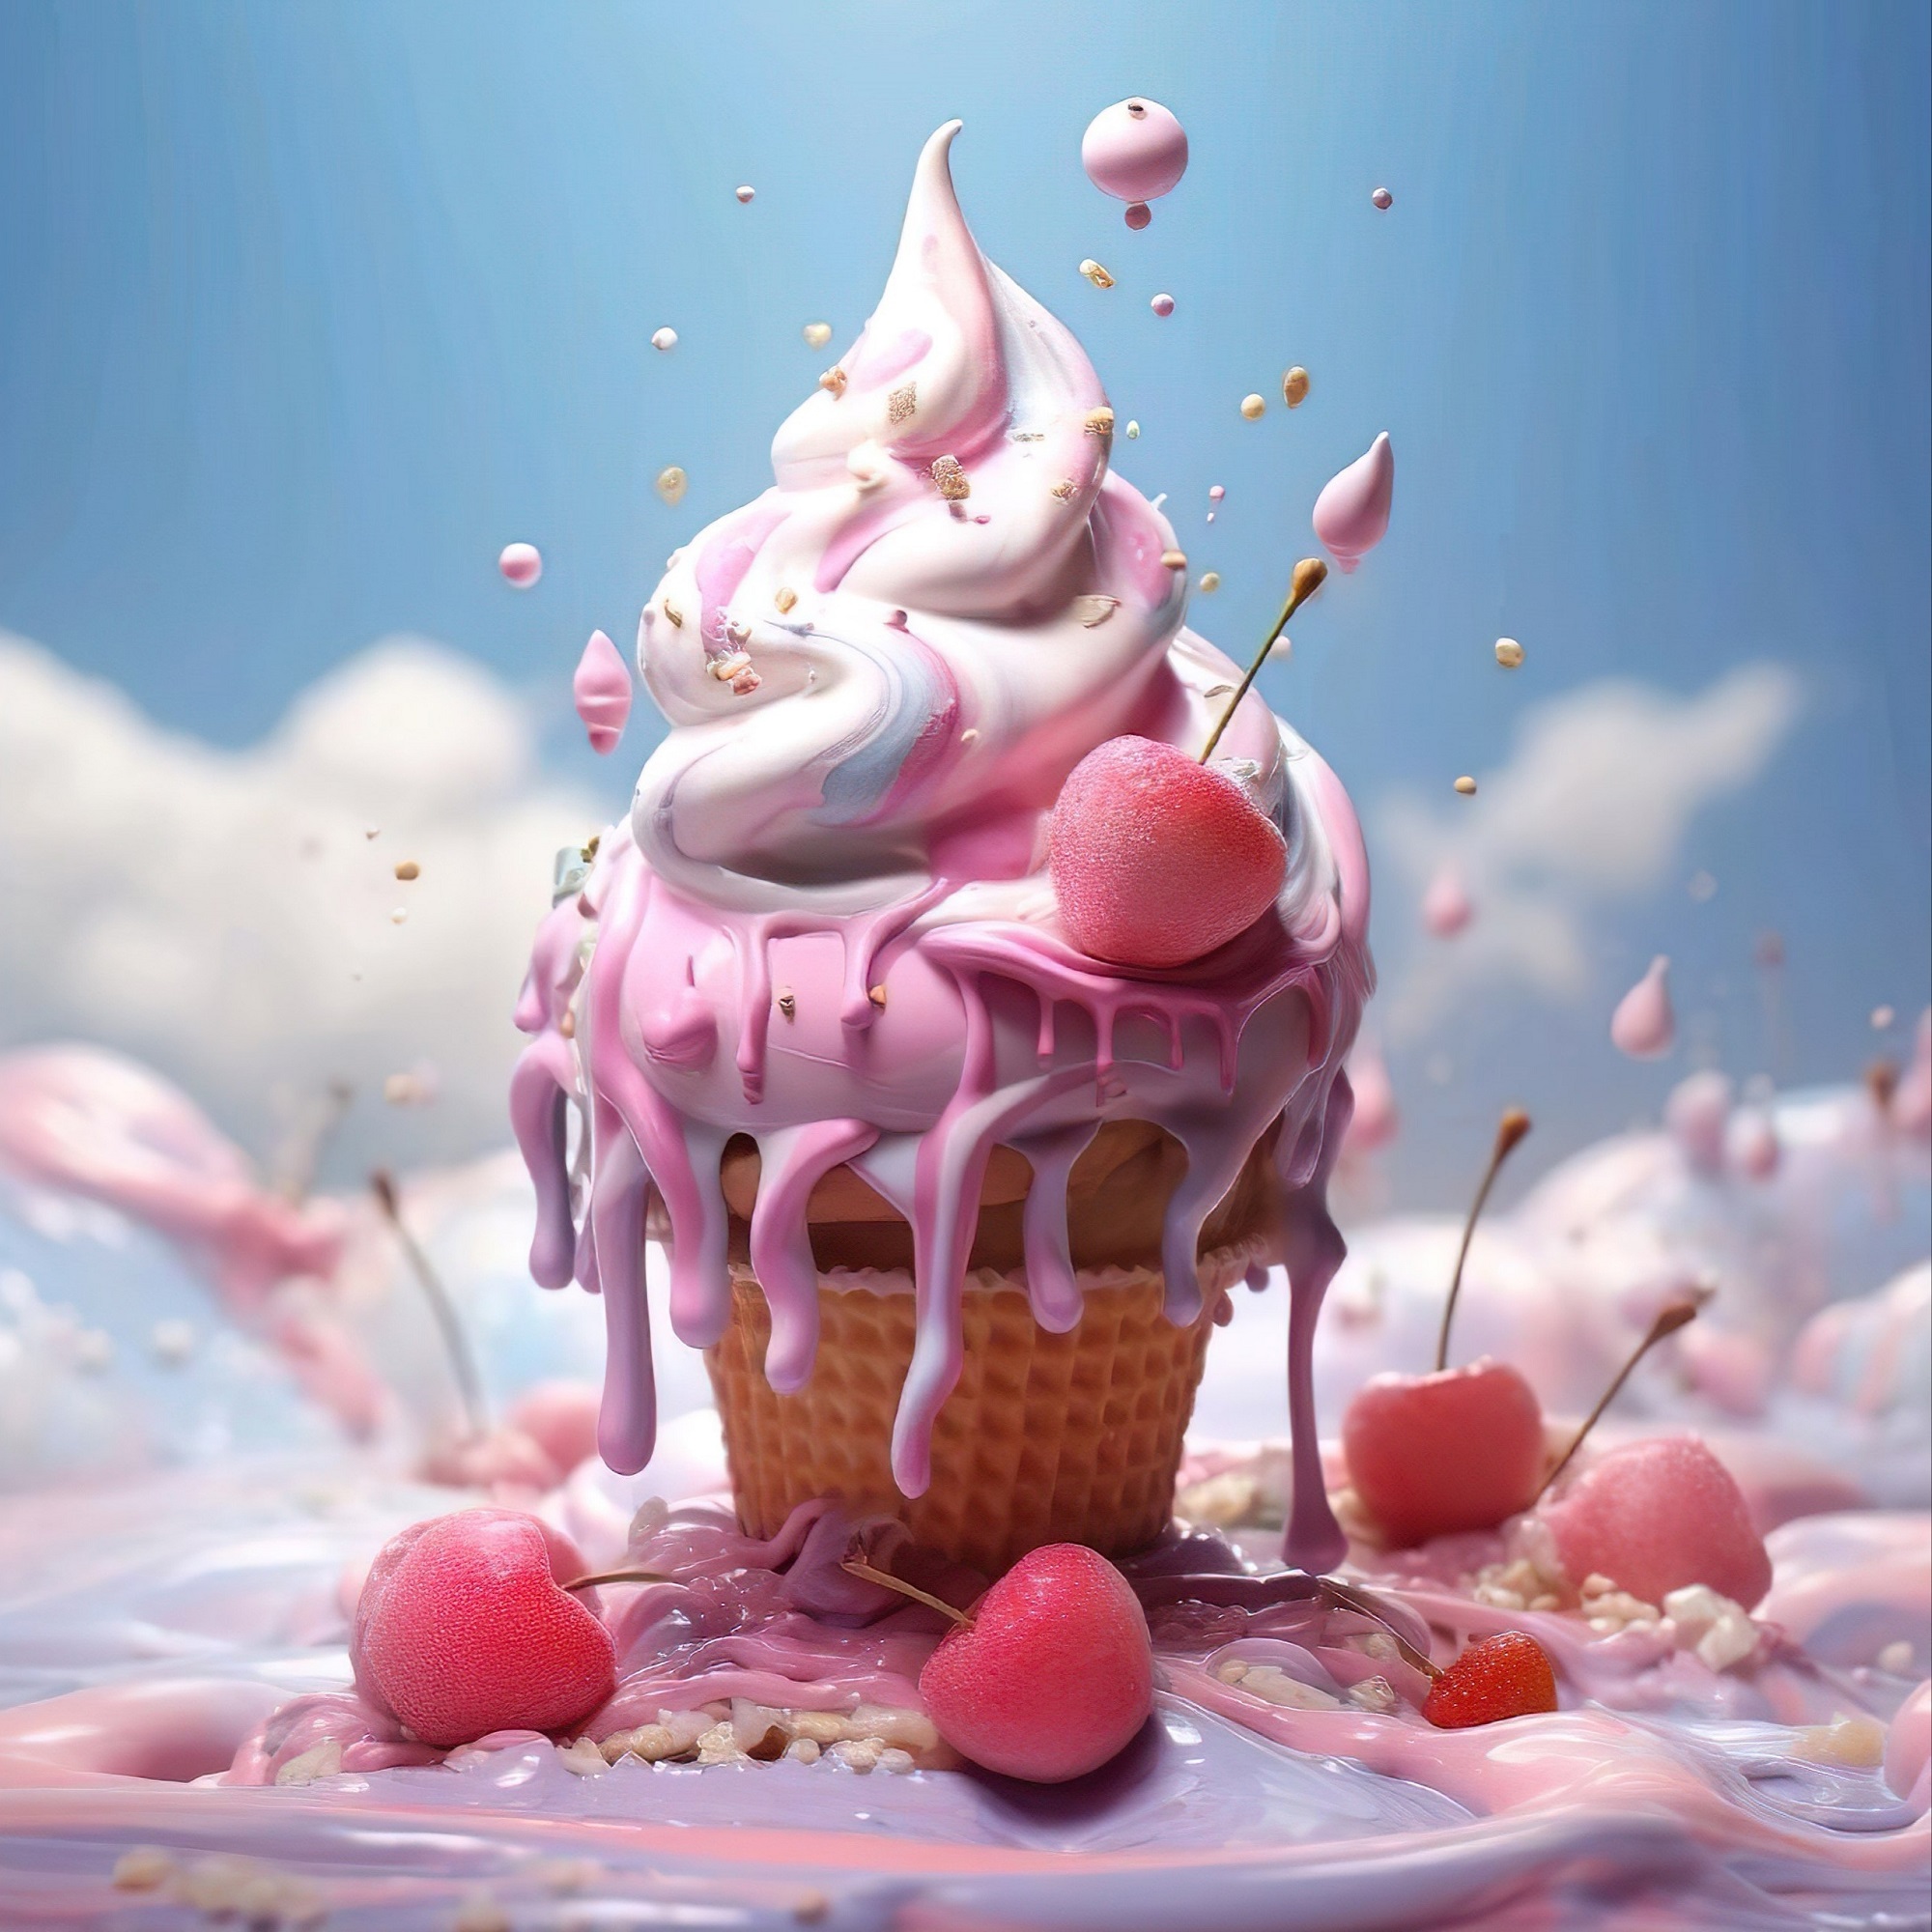 General 2000x2000 Alexey Sominsky AI art Midjourney food sweets clouds digital art cupcakes cherries fruit blurred blurry background